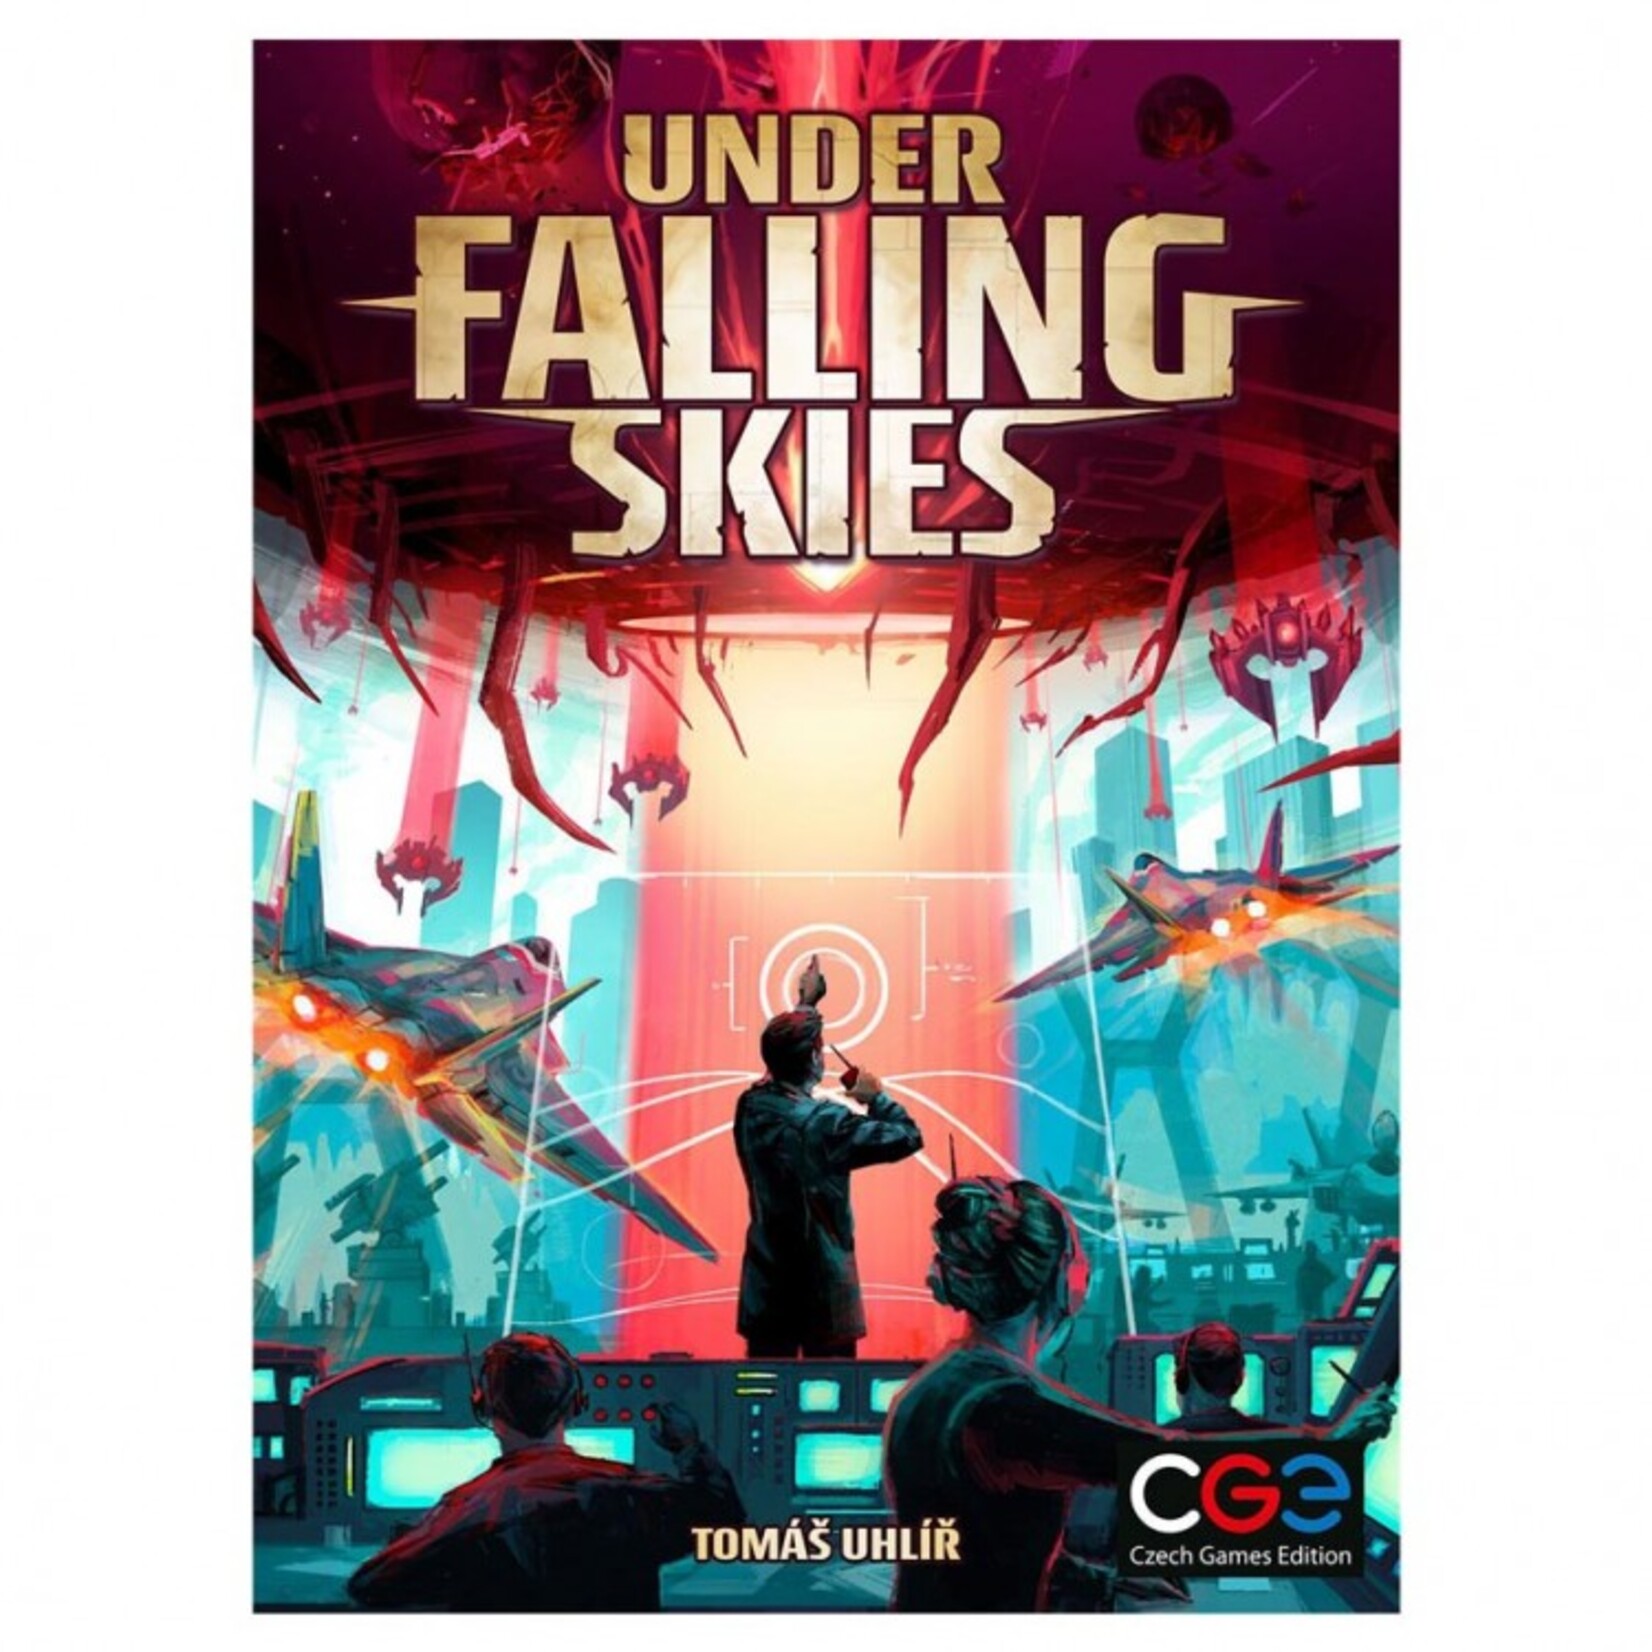 Czech Games Editions Under Falling Skies